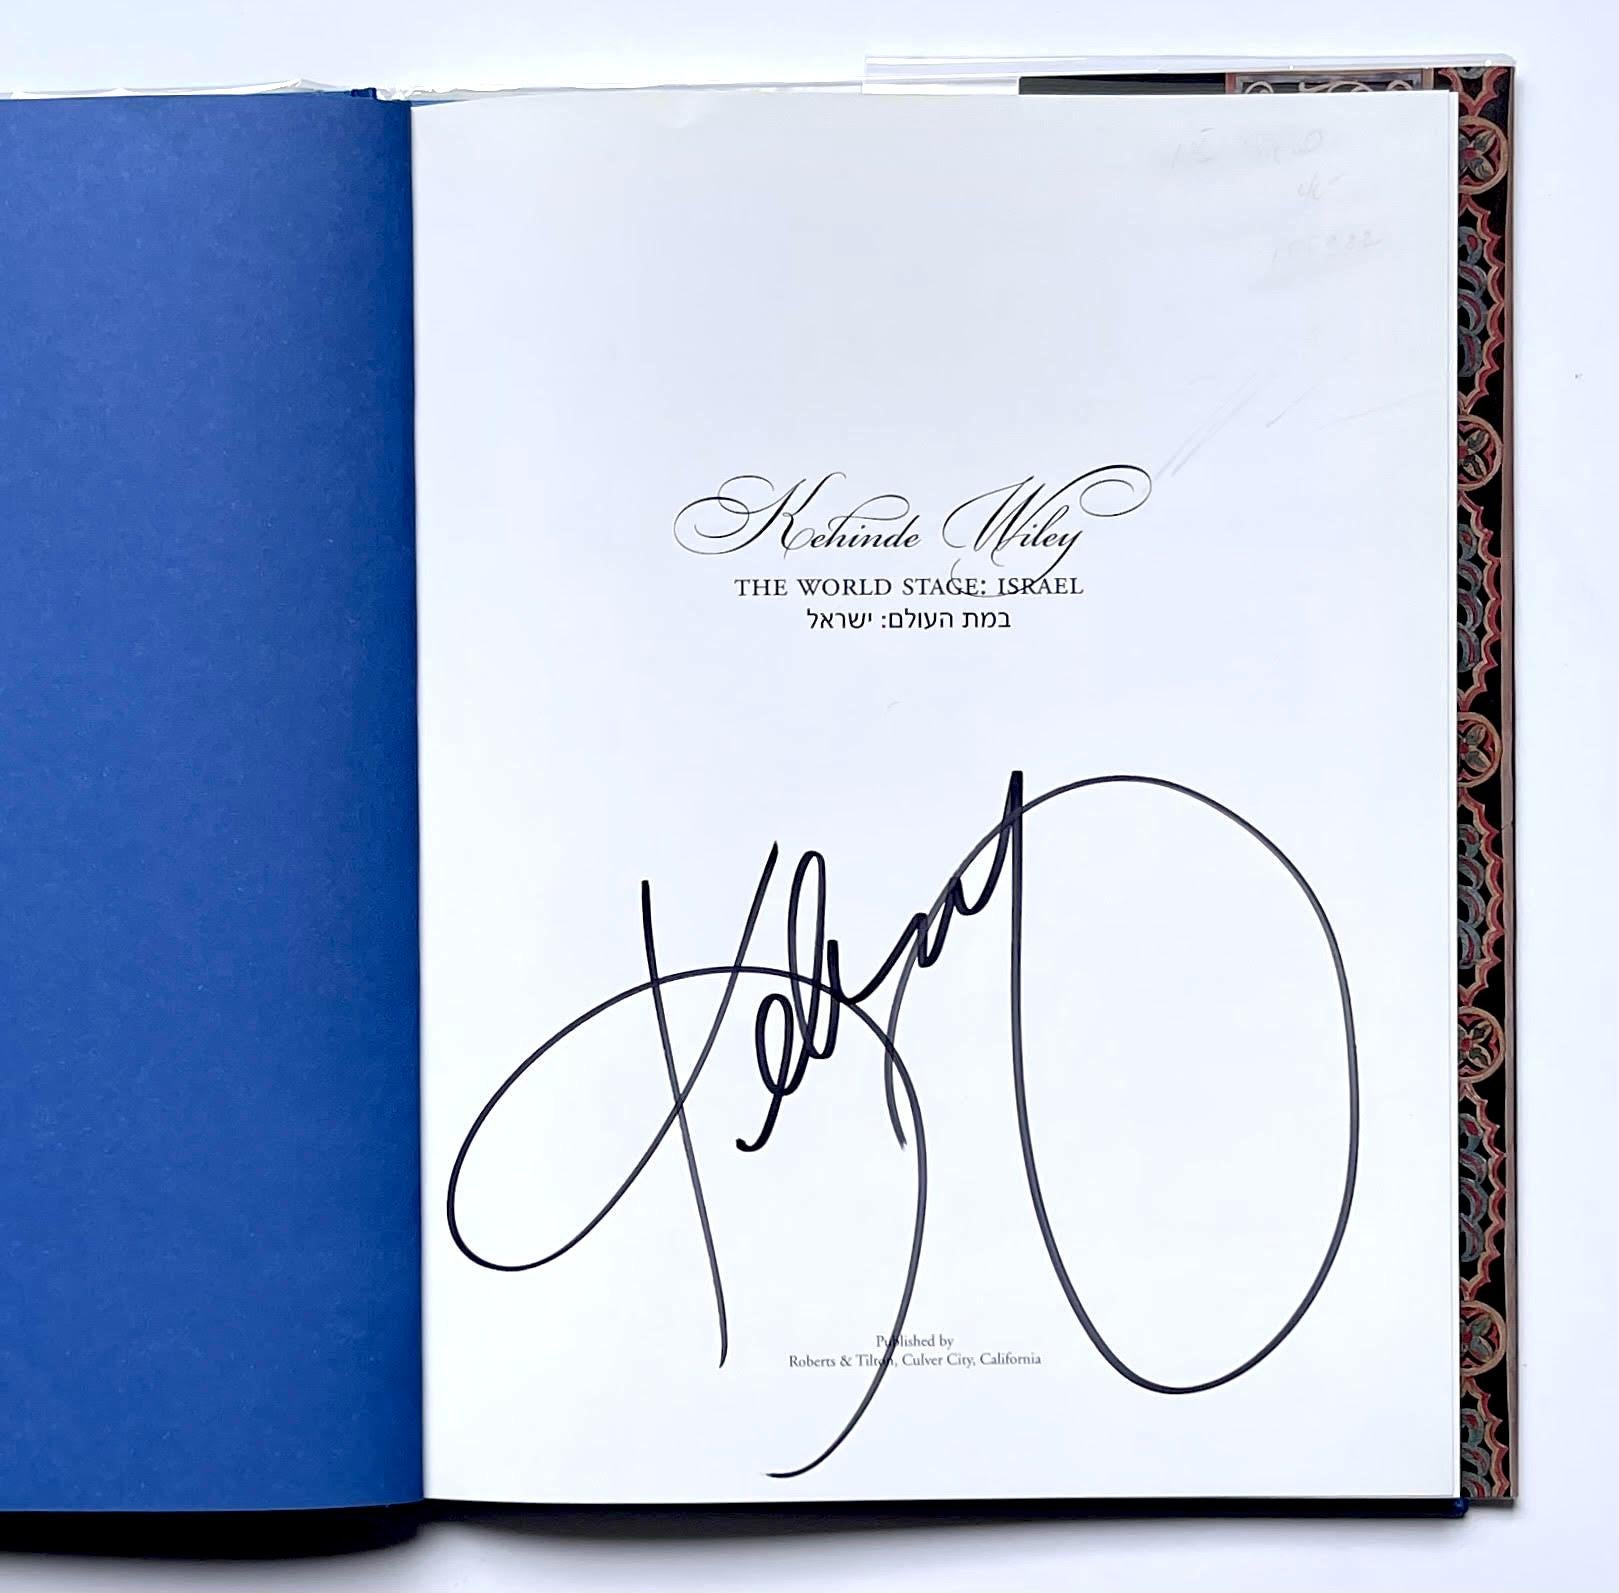 Kehinde Wiley
The World Stage: Israel (Hand Signed by Kehinde Wiley), 2012
Illustrated hardback monograph with dust jacket. Hand Signed by Kehinde Wiley
Boldly signed in black marker by Kehinde Wiley on the title page
11 1/4 × 8 4/5 × 1/2